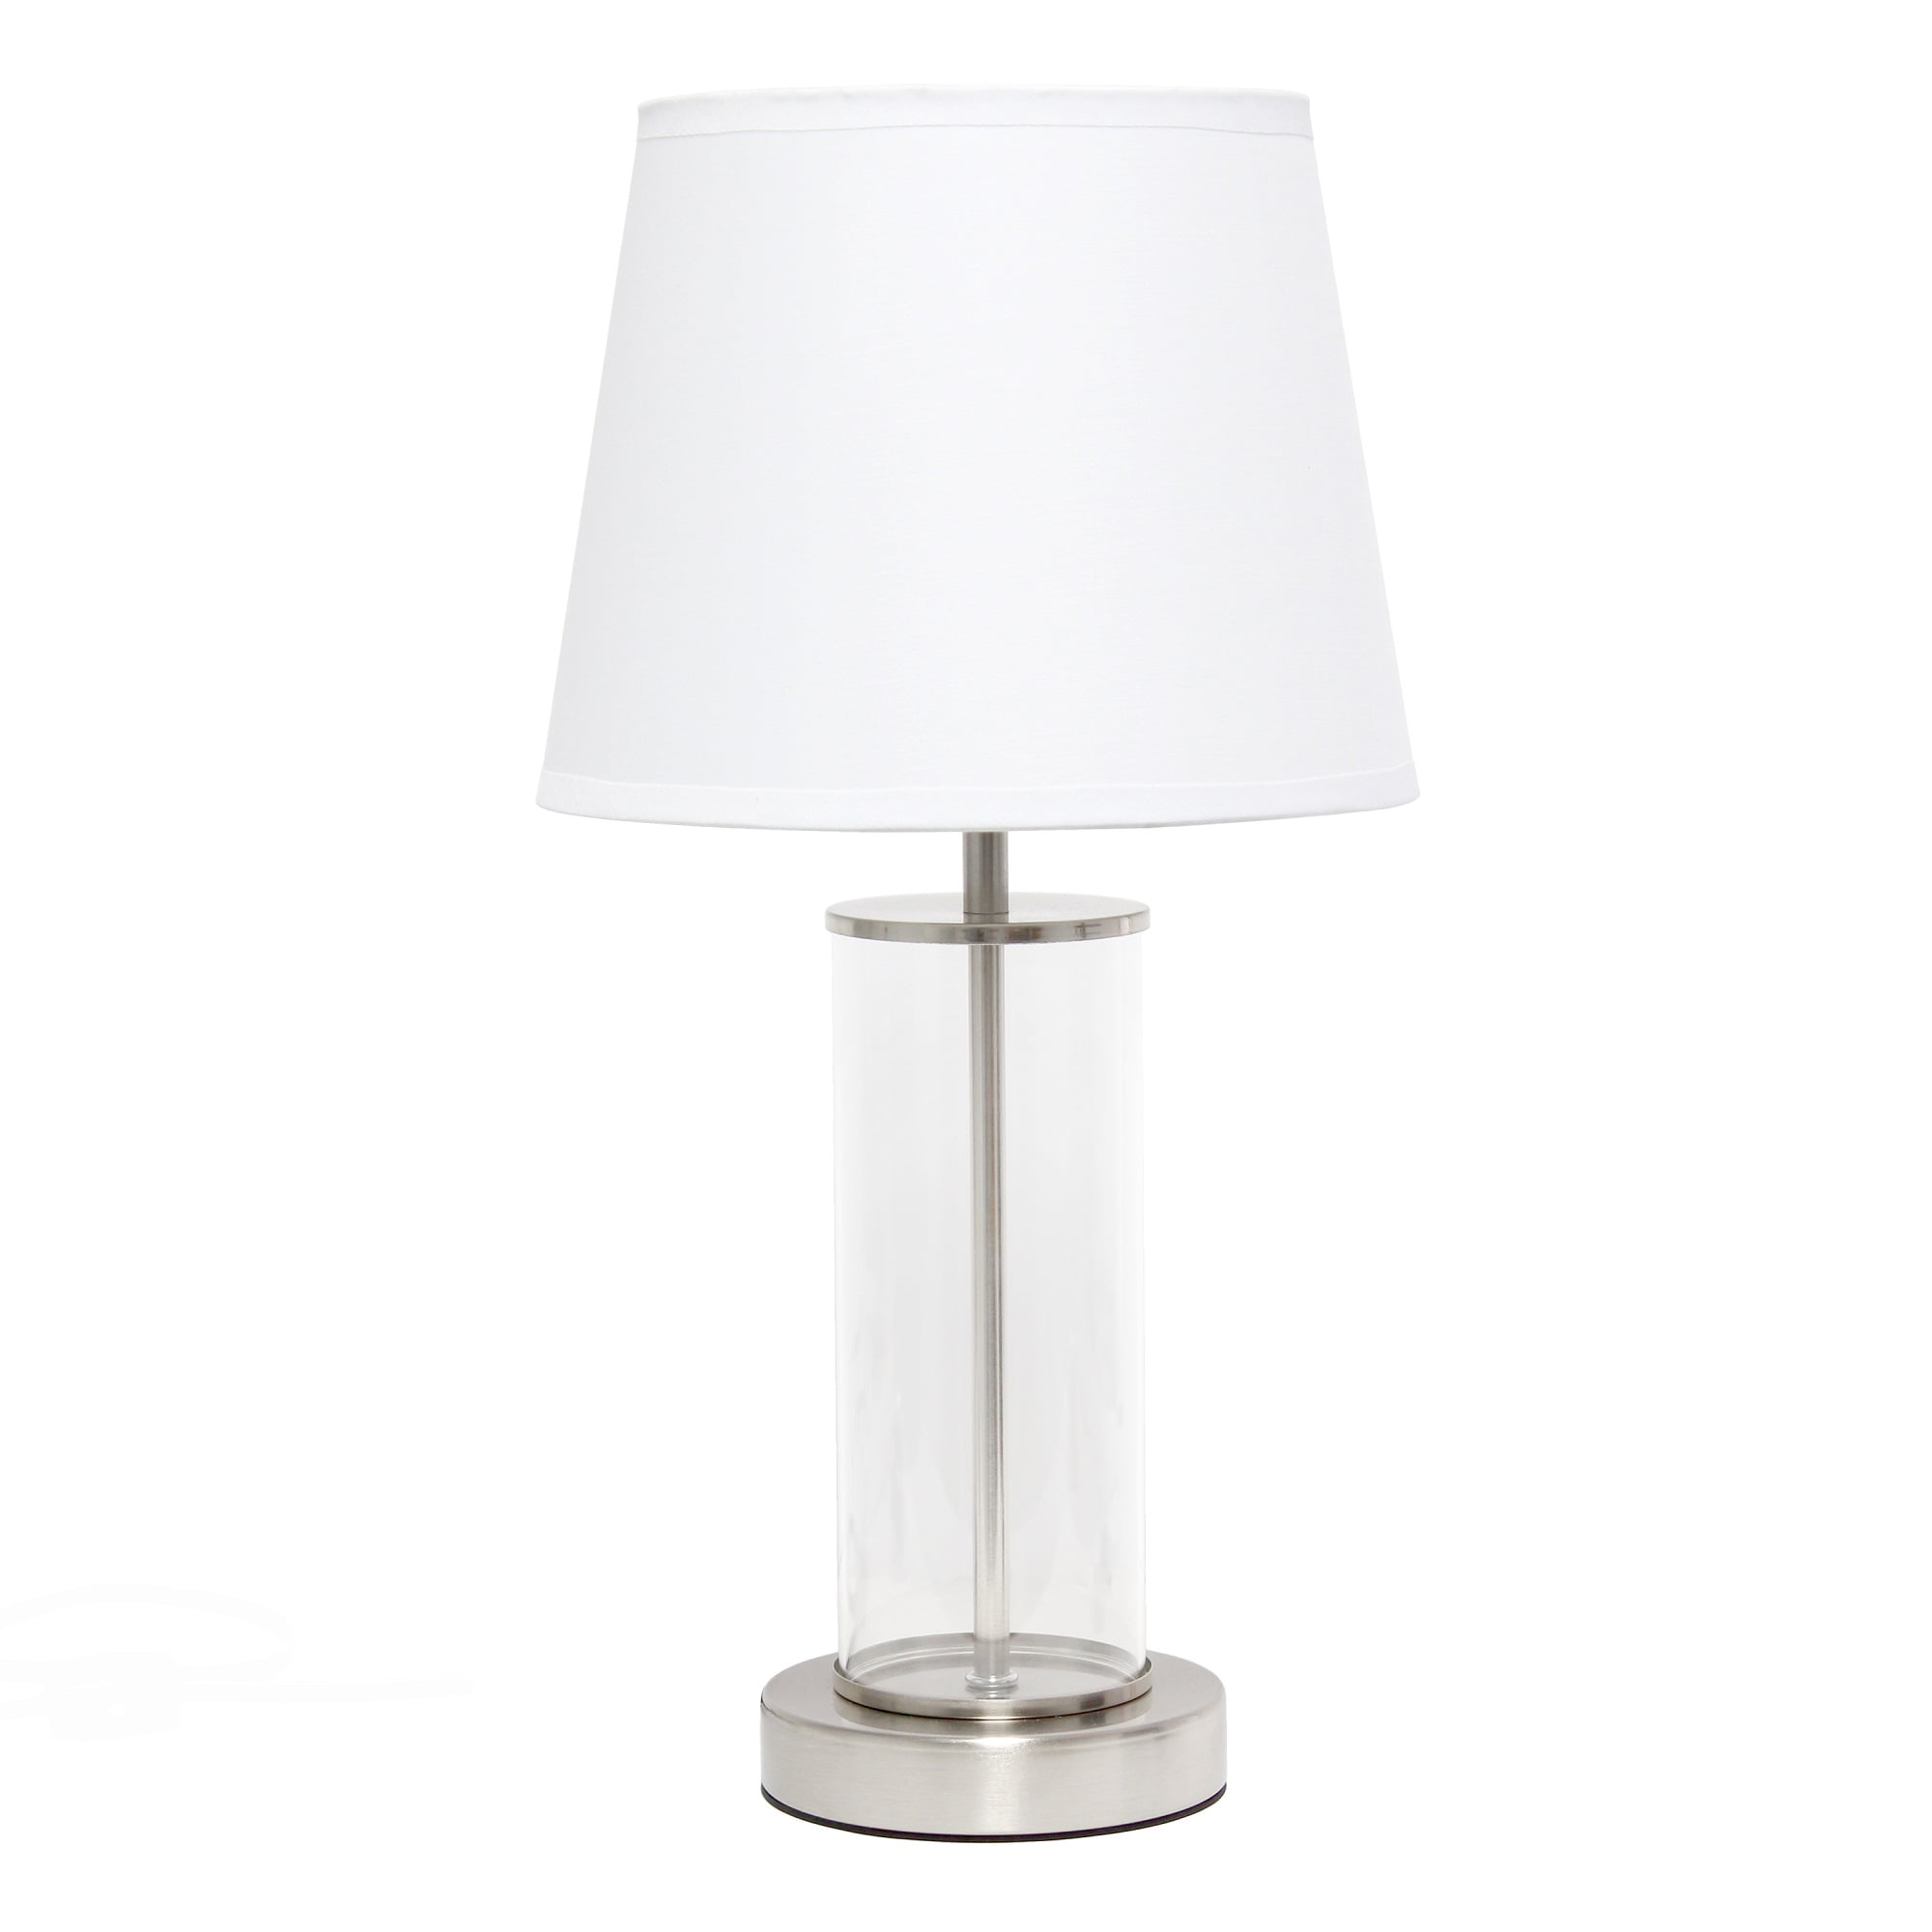 Simple Designs Encased Metal and Clear Glass Table Lamp, Brushed Nickel and White